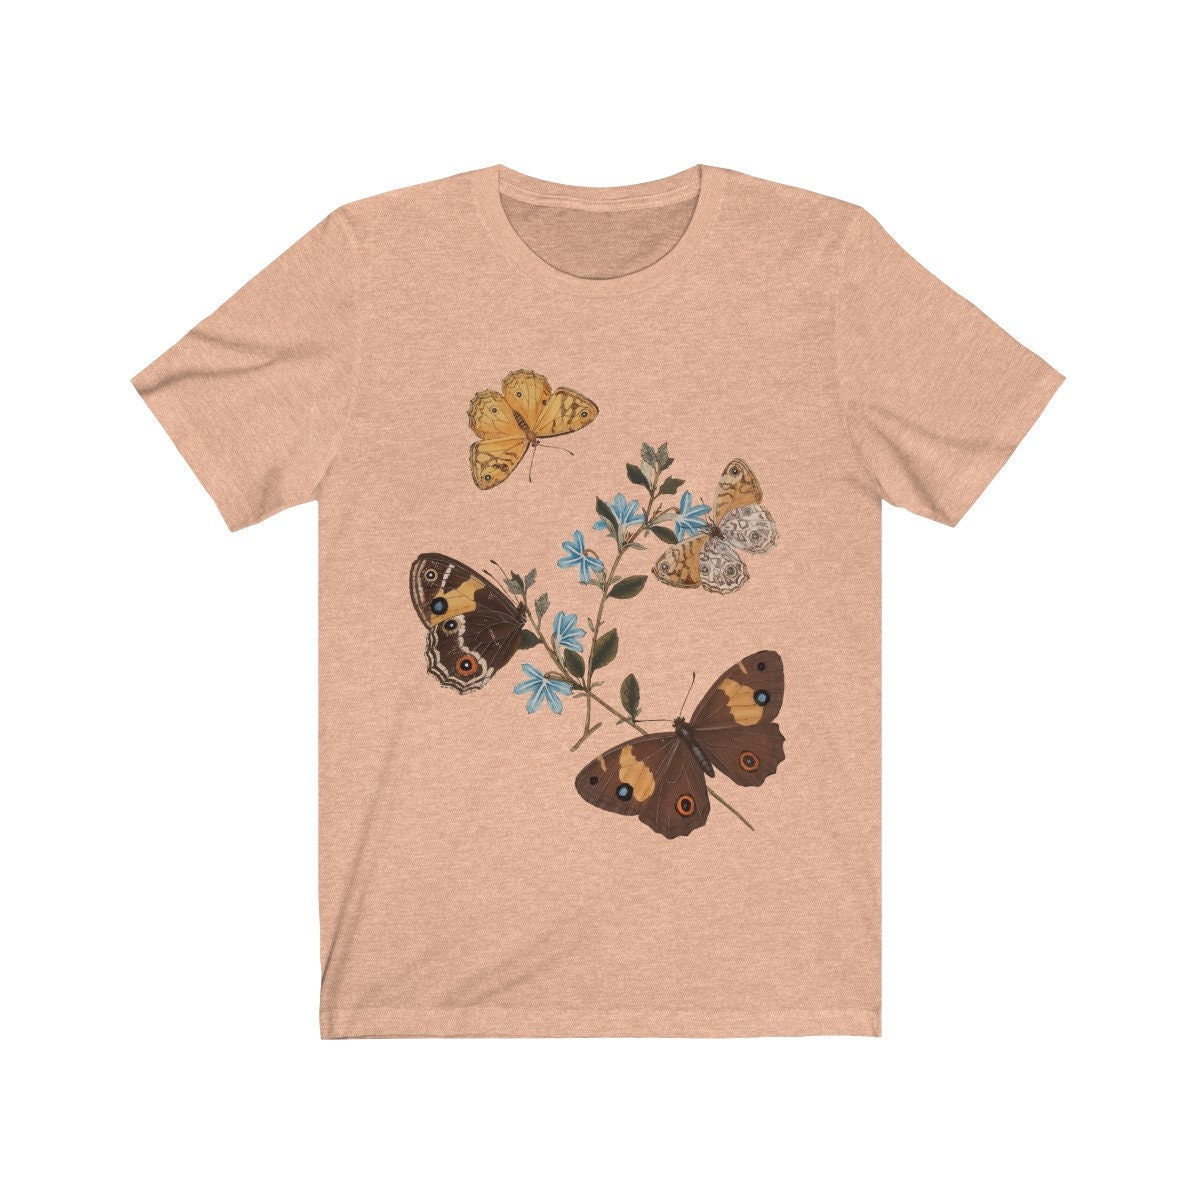 Butterfly T-shirt Graphic Shirt Printed T-shirt Vintage - Etsy